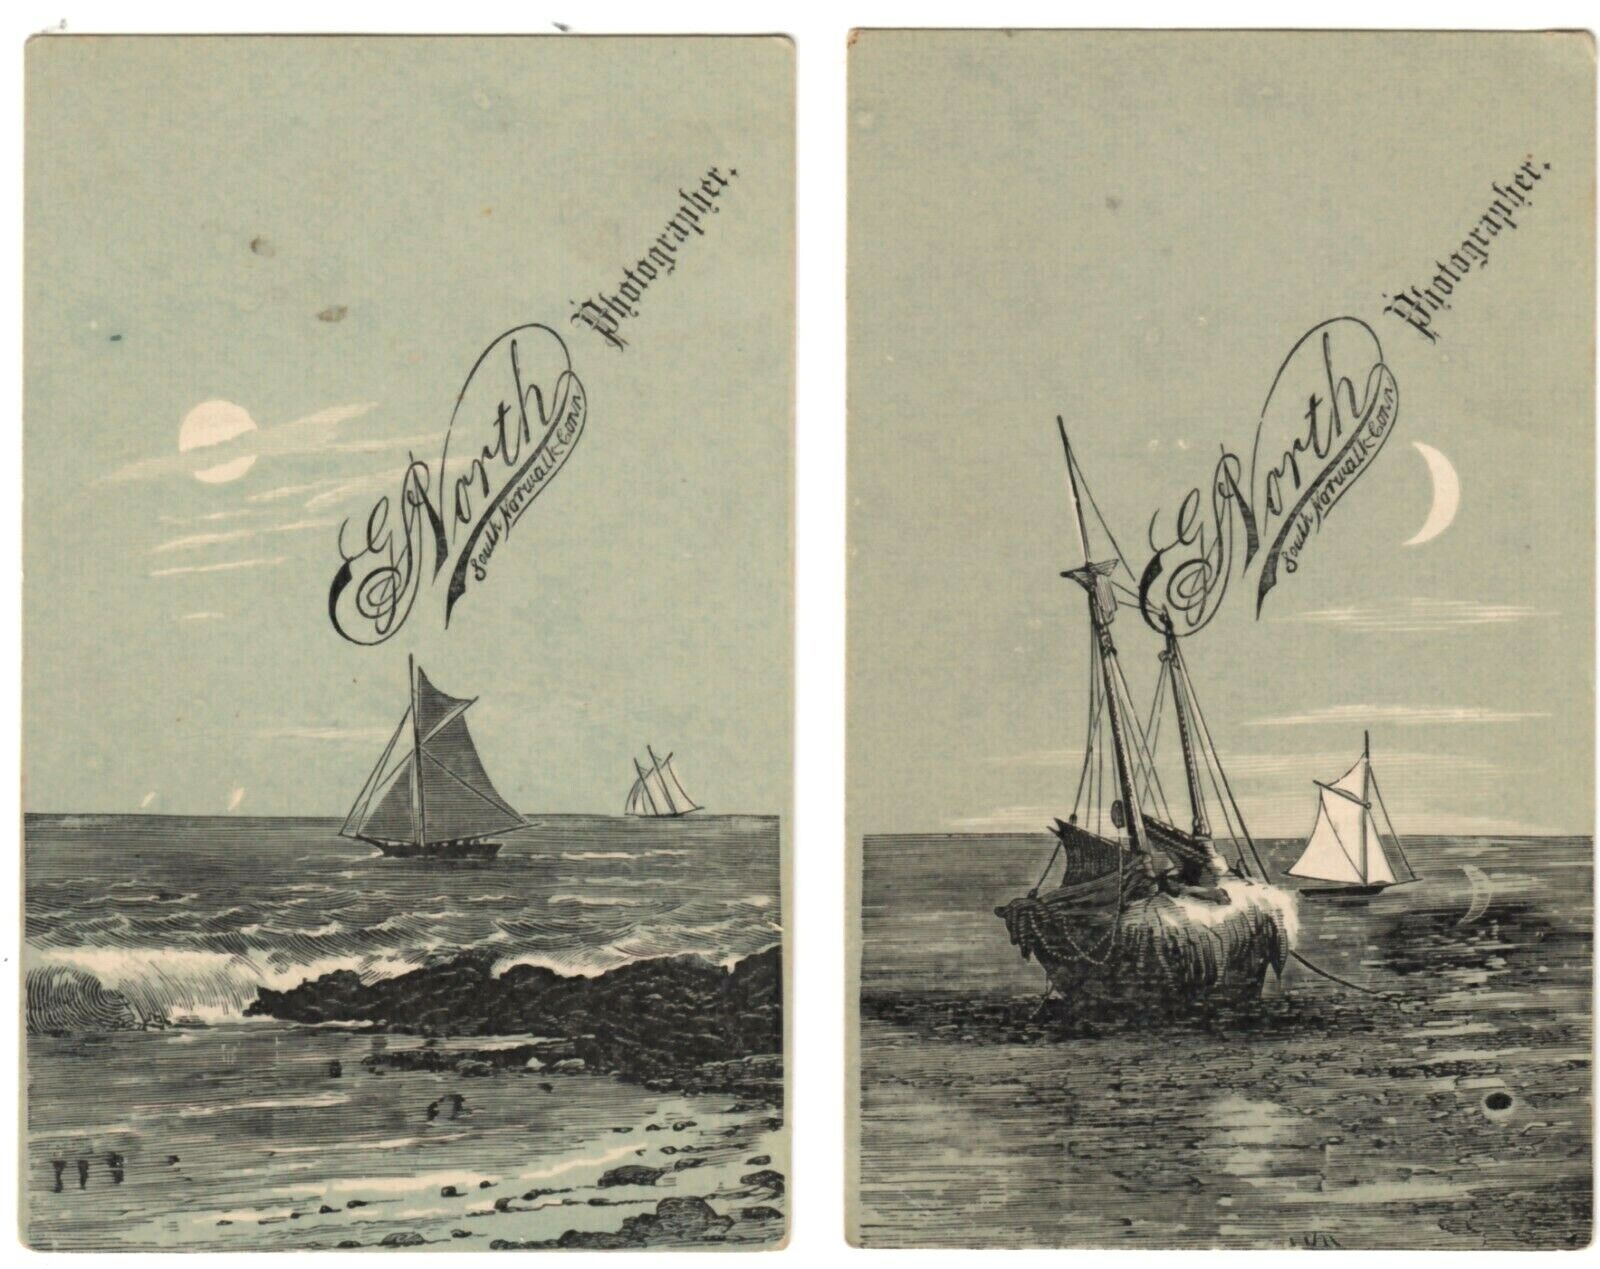 Lot of 2 G. North Photographer South Norwalk CT Engraved Nautical Trade Cards George S. North , Photographer